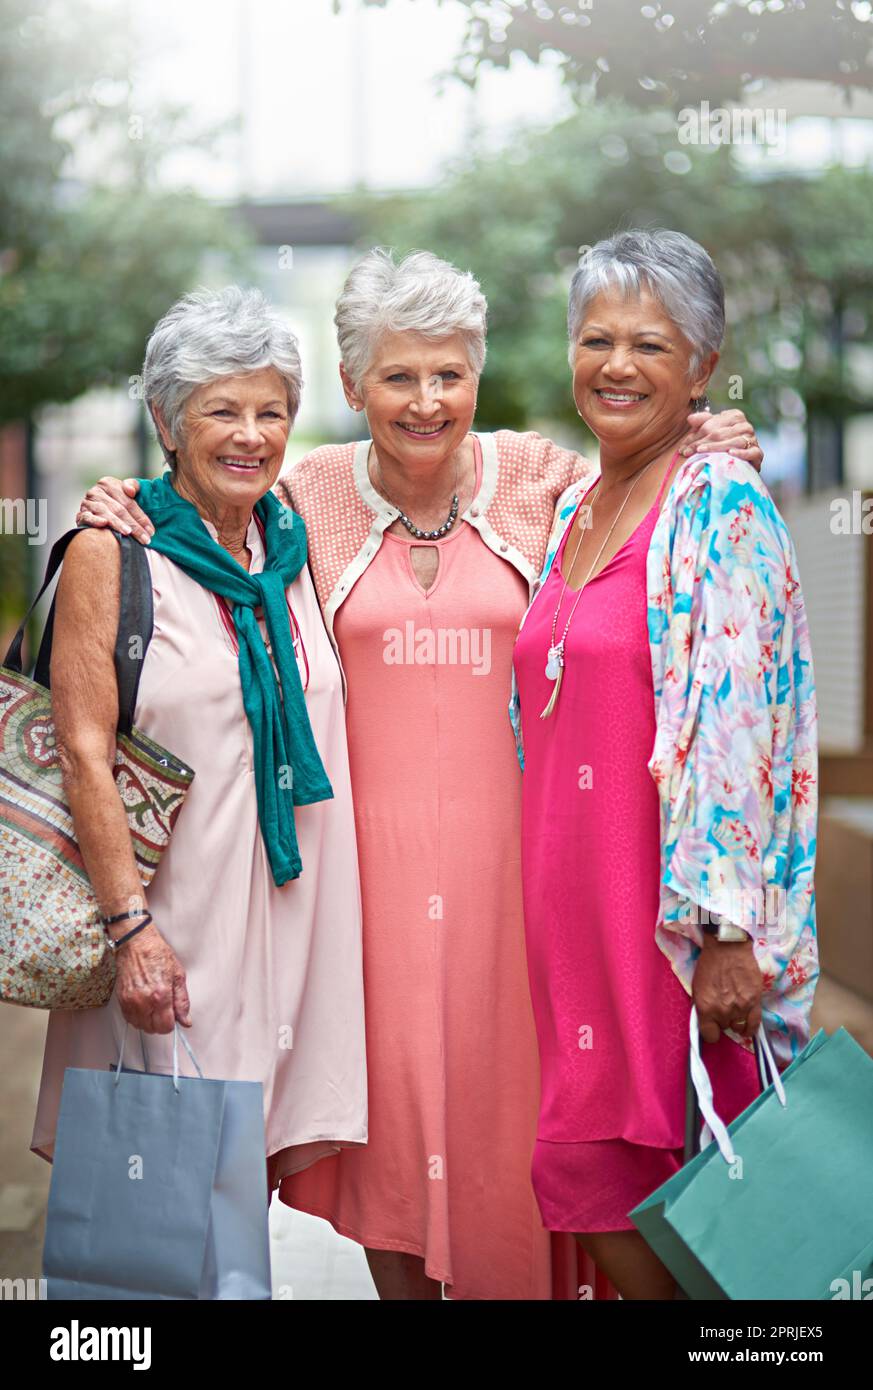 We love our shopping sprees. Cropped portrait of a three senior women out on a shopping spree. Stock Photo